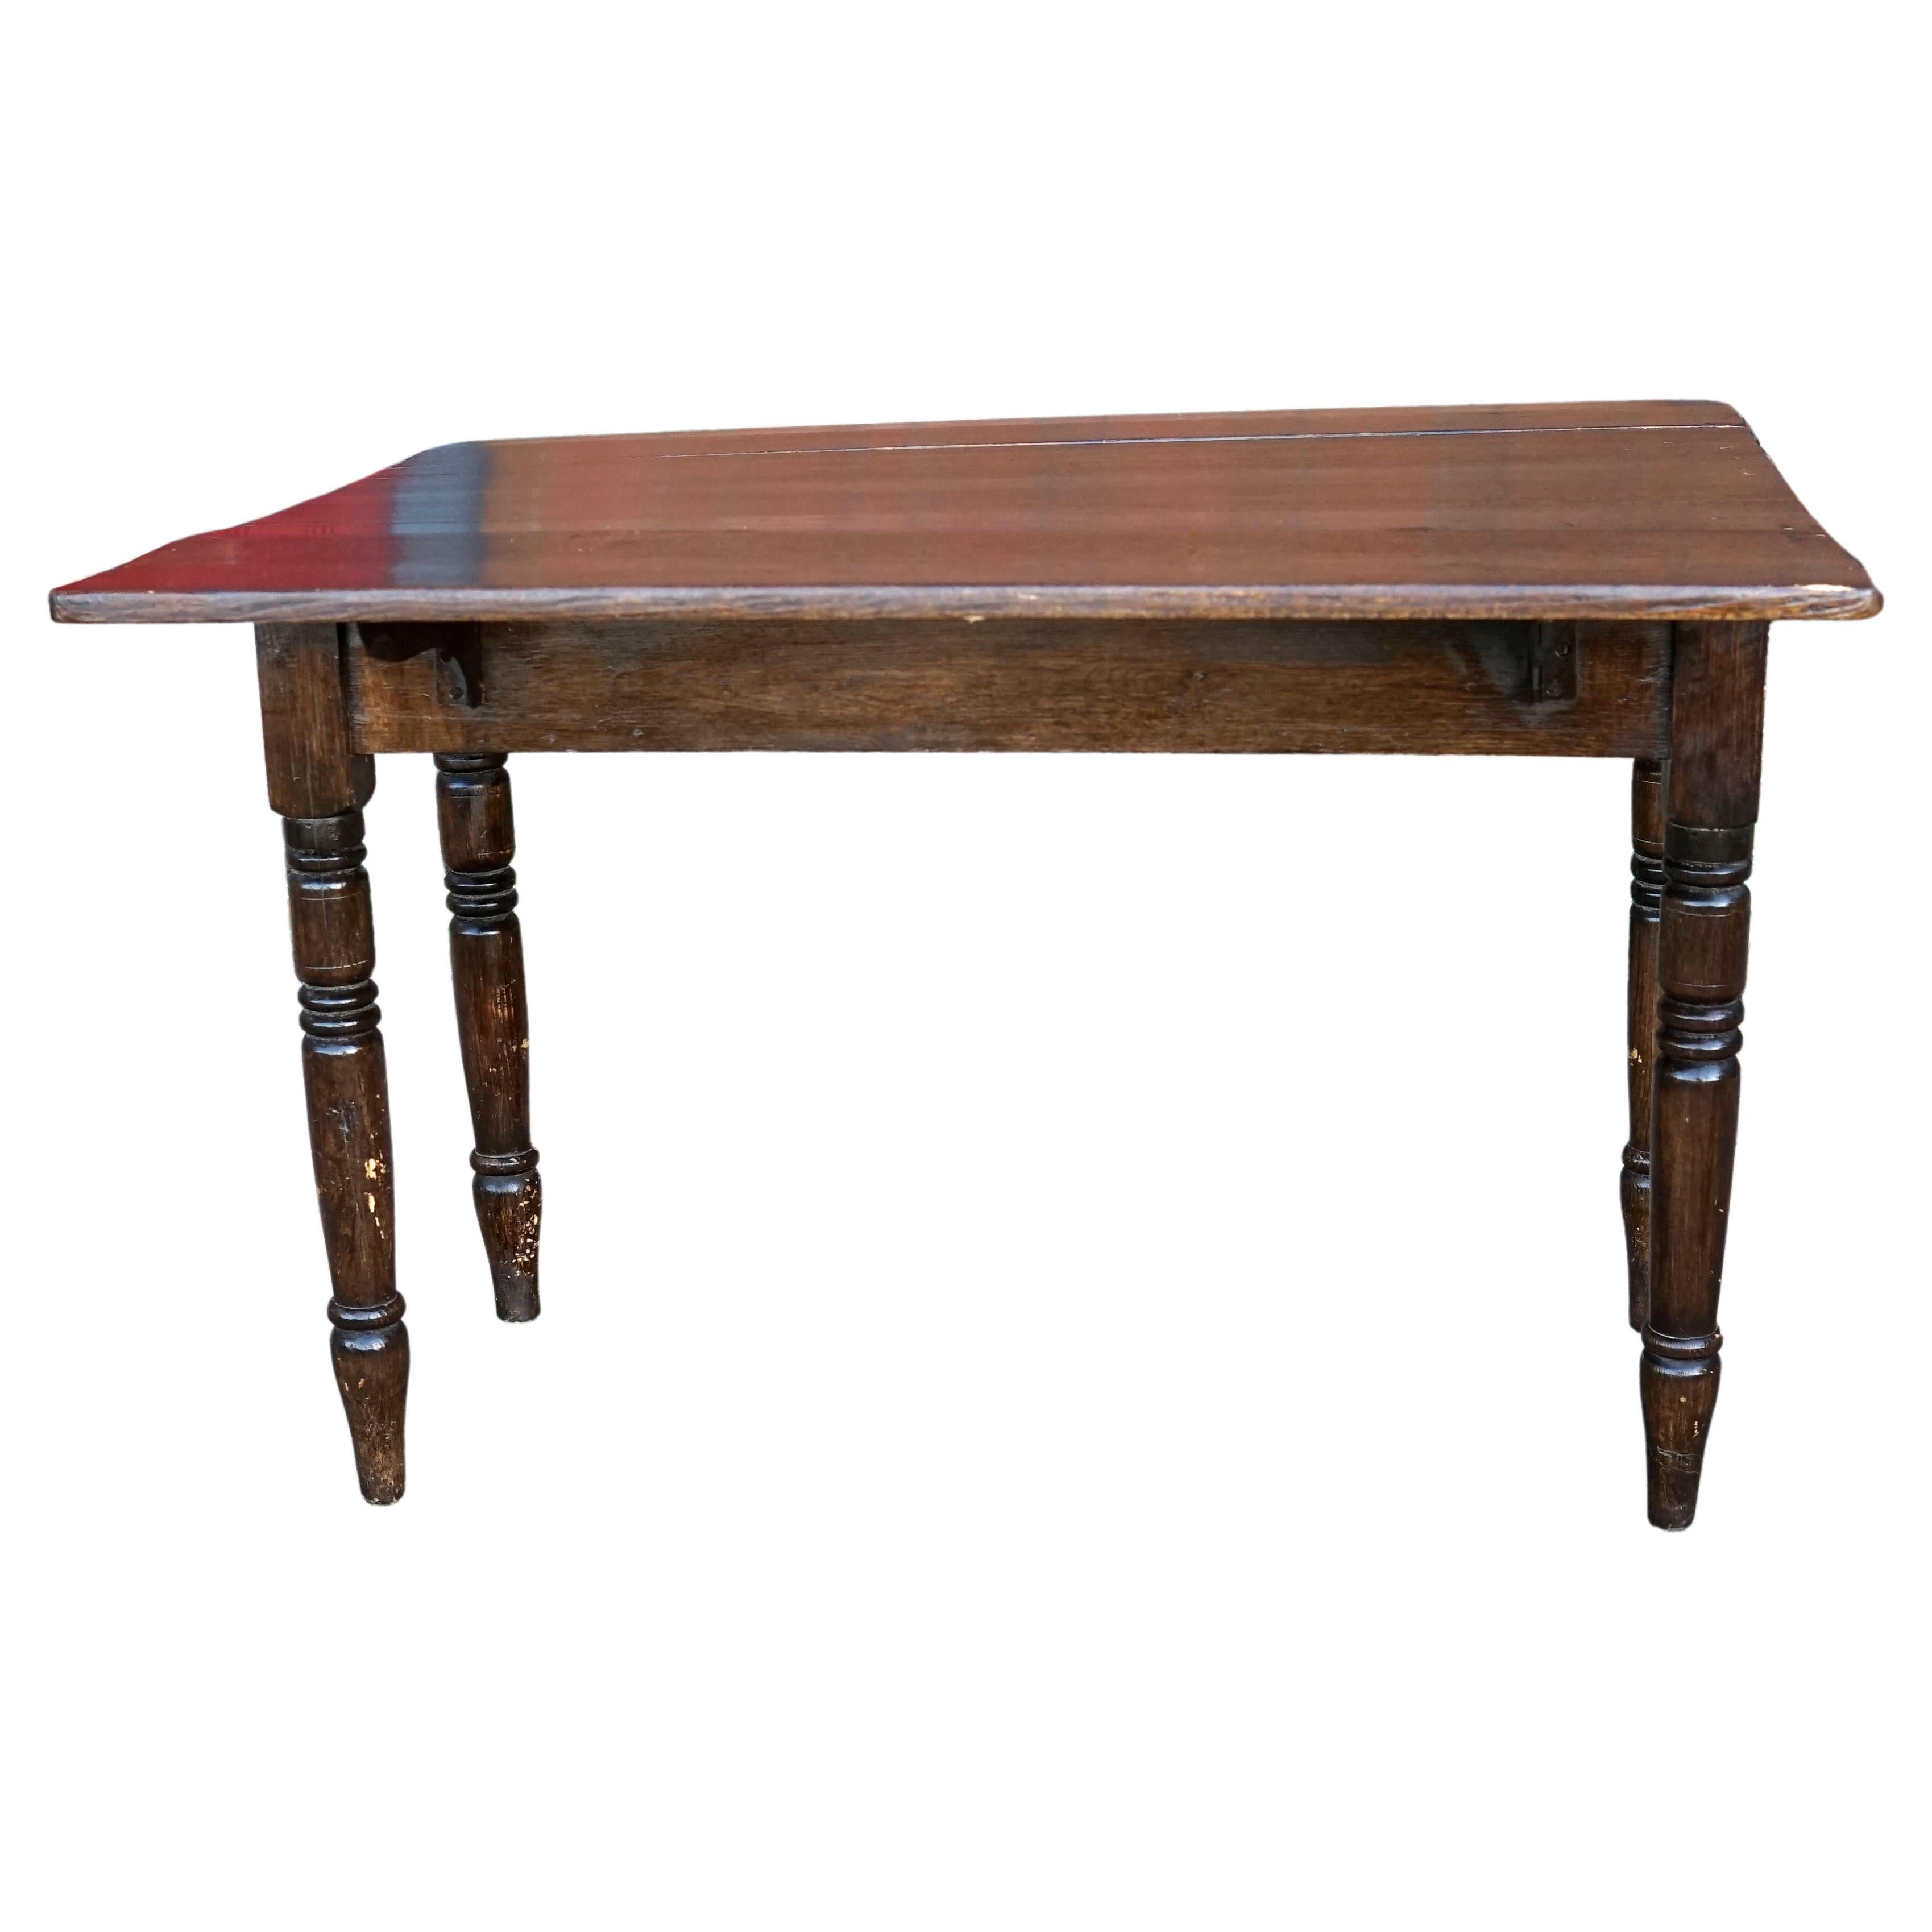 19th Century Mahogany Drop Leaf Table with Turned Legs For Sale